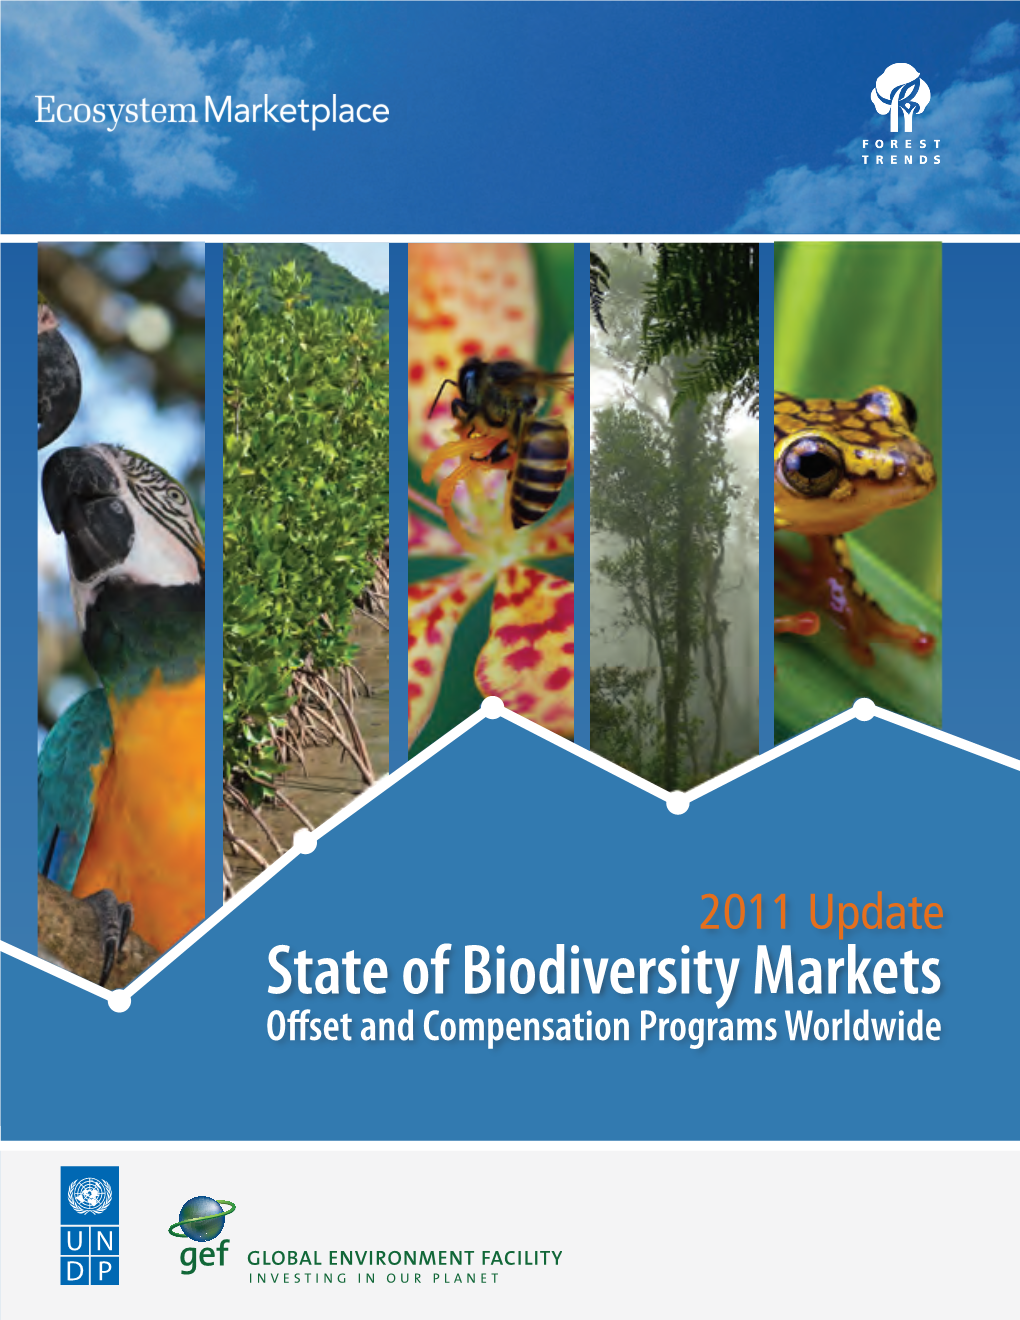 State of Biodiversity Markets Offset and Compensation Programs Worldwide